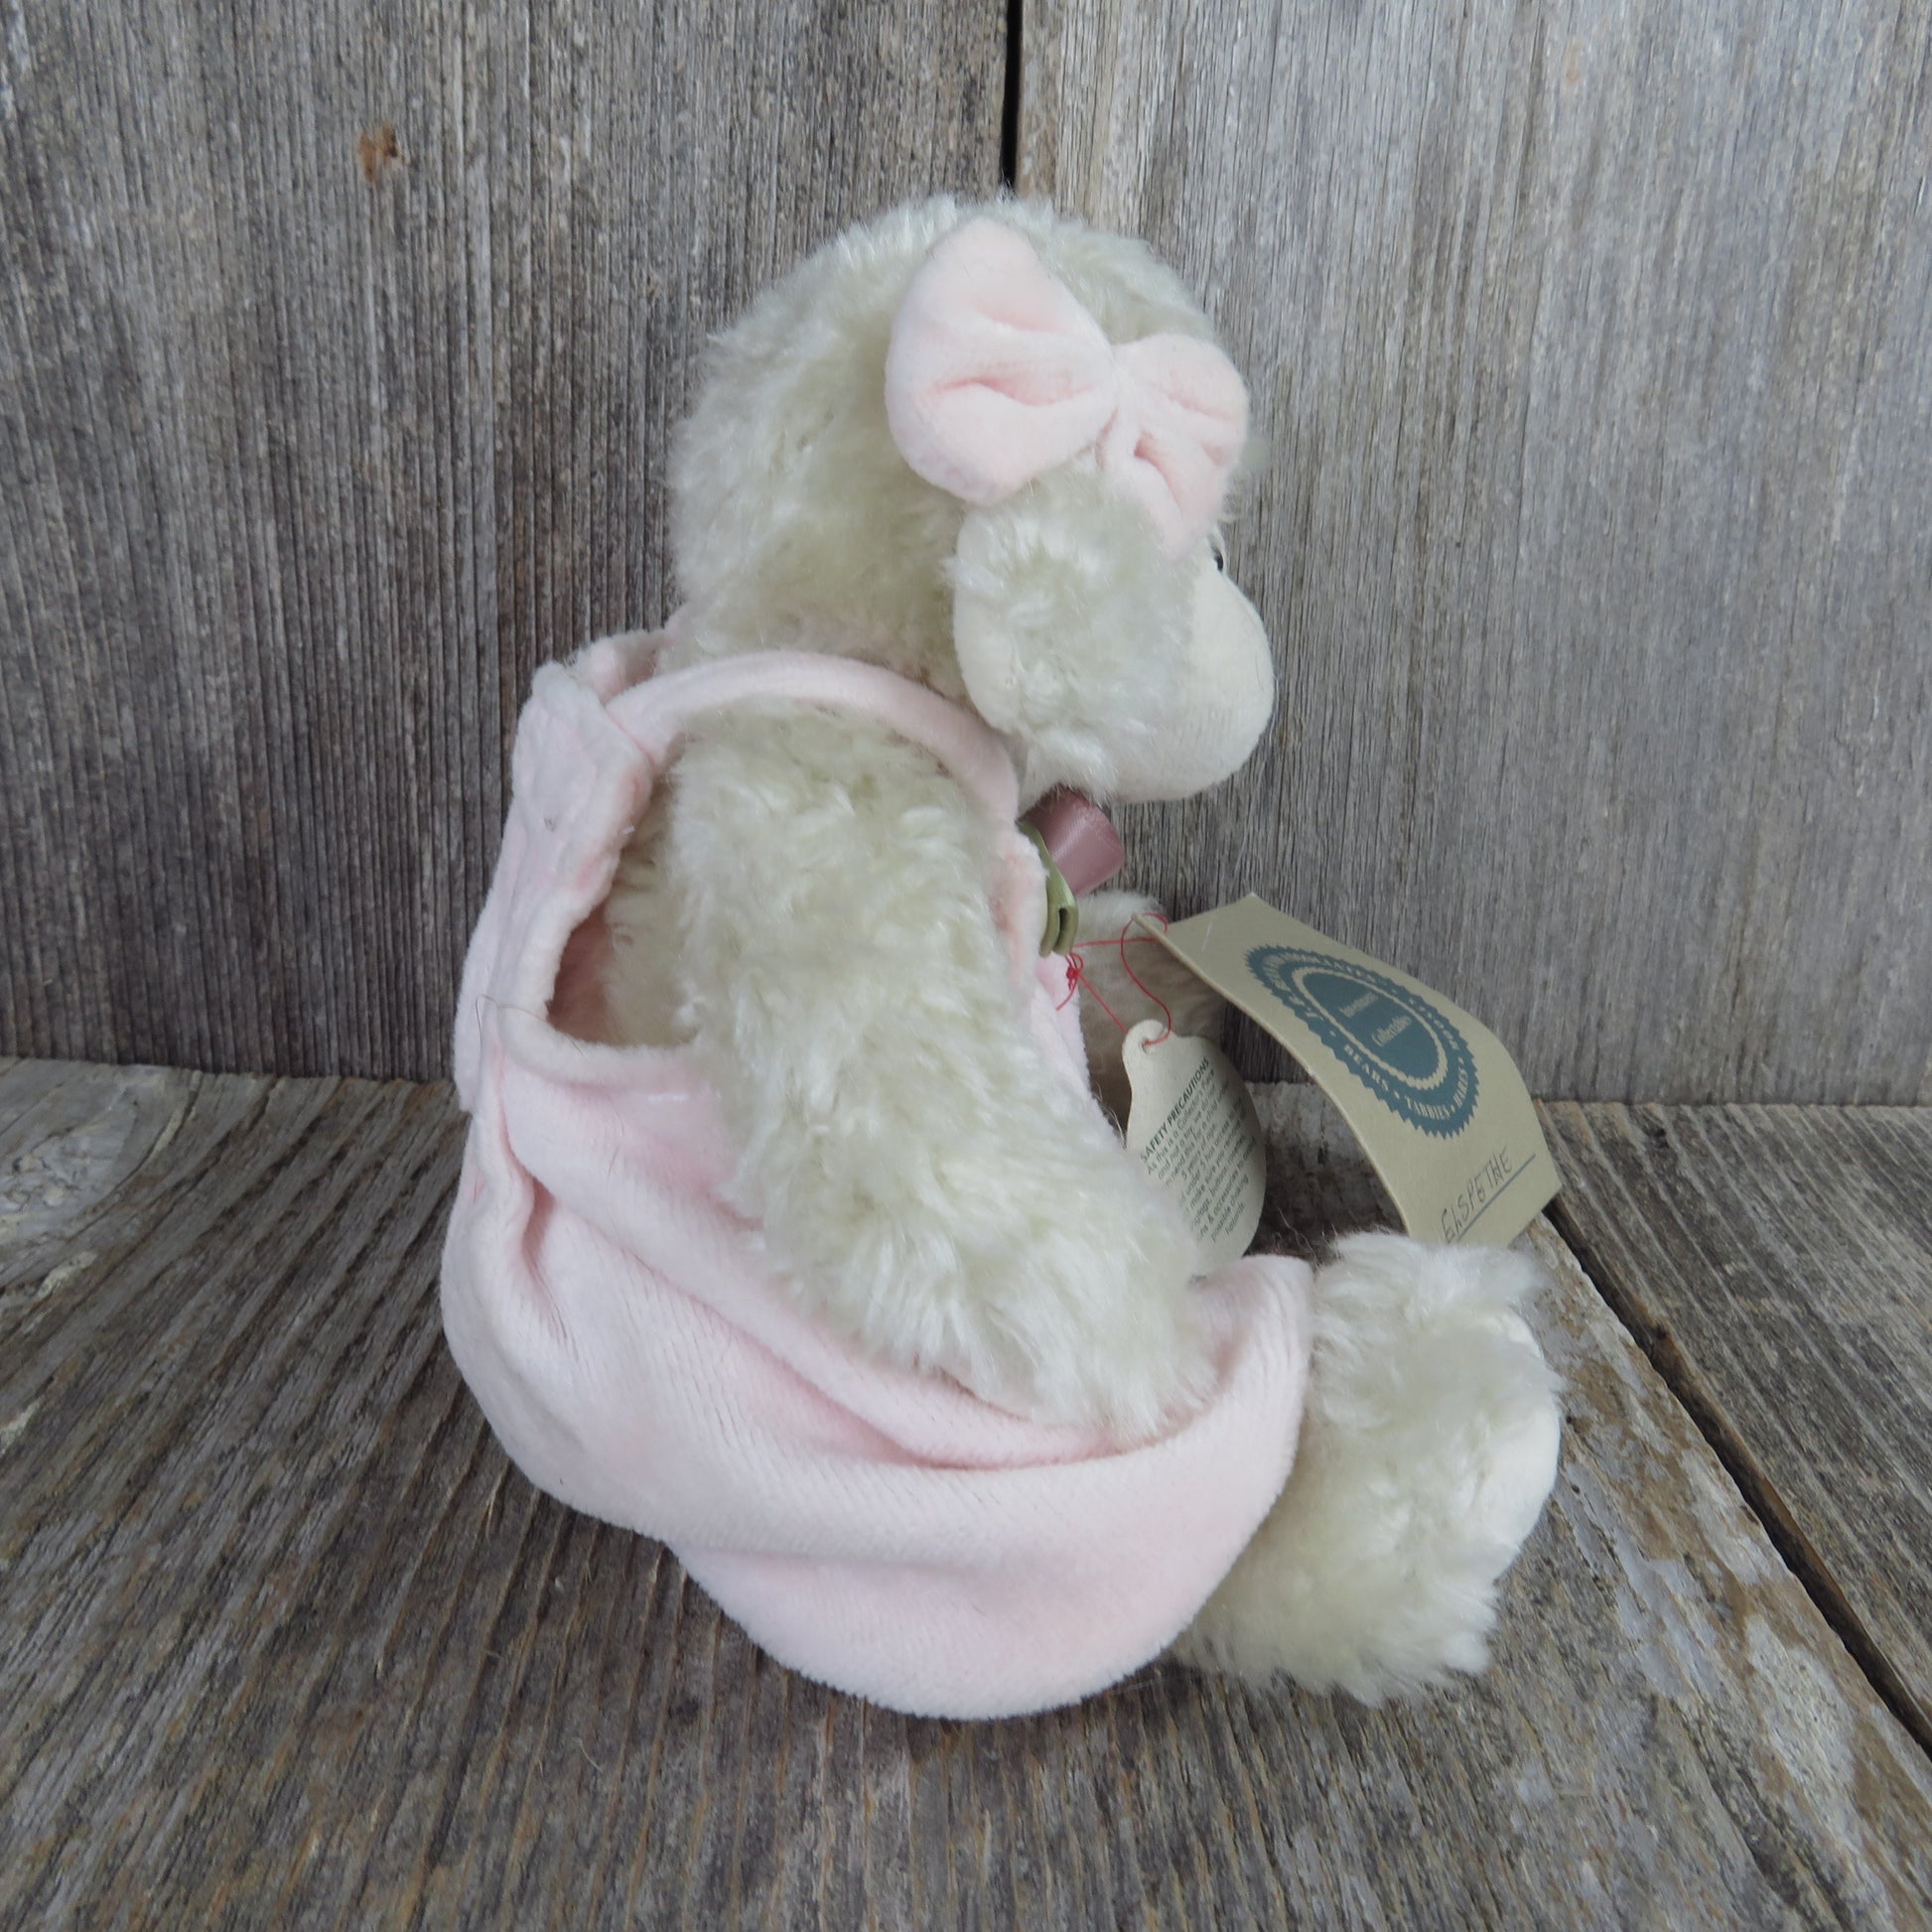 Vintage Lamb Sheep Plush Boyds Pink White Elspethe Jointed Bib Overalls 1996 - At Grandma's Table